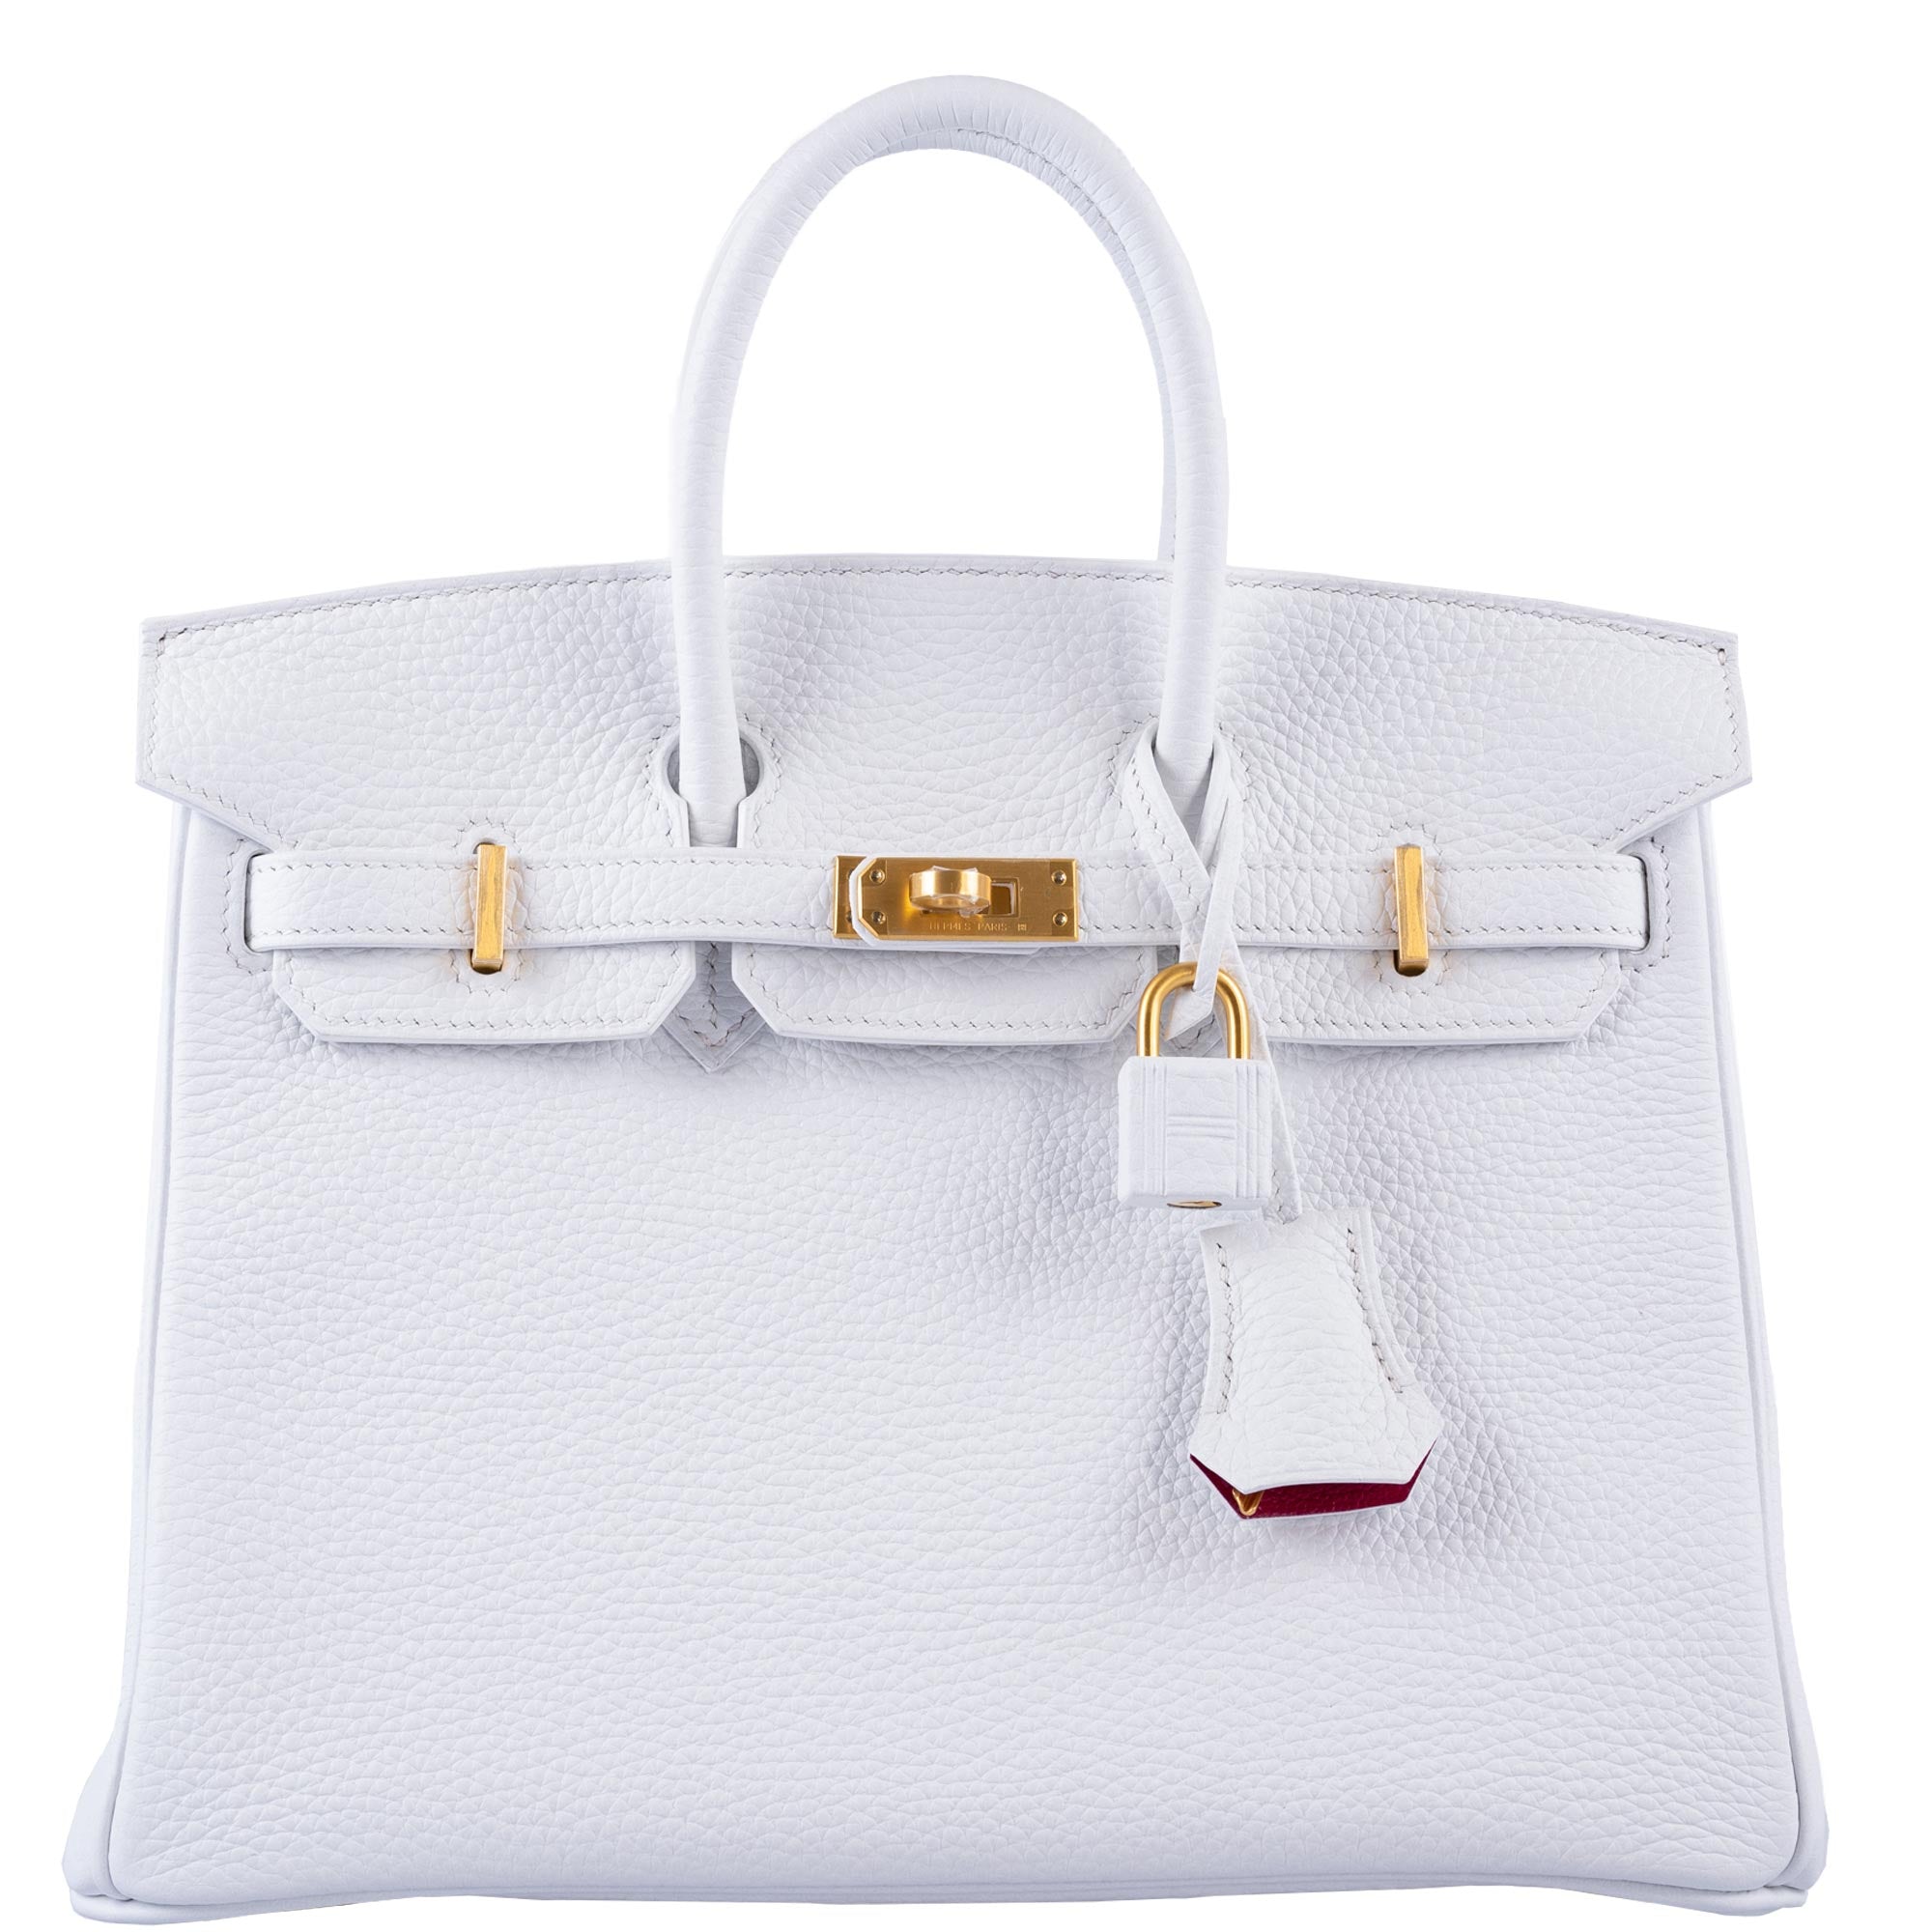 Hermès HSS Birkin 25 White Togo and Rose Pourpre Interior with Brushed